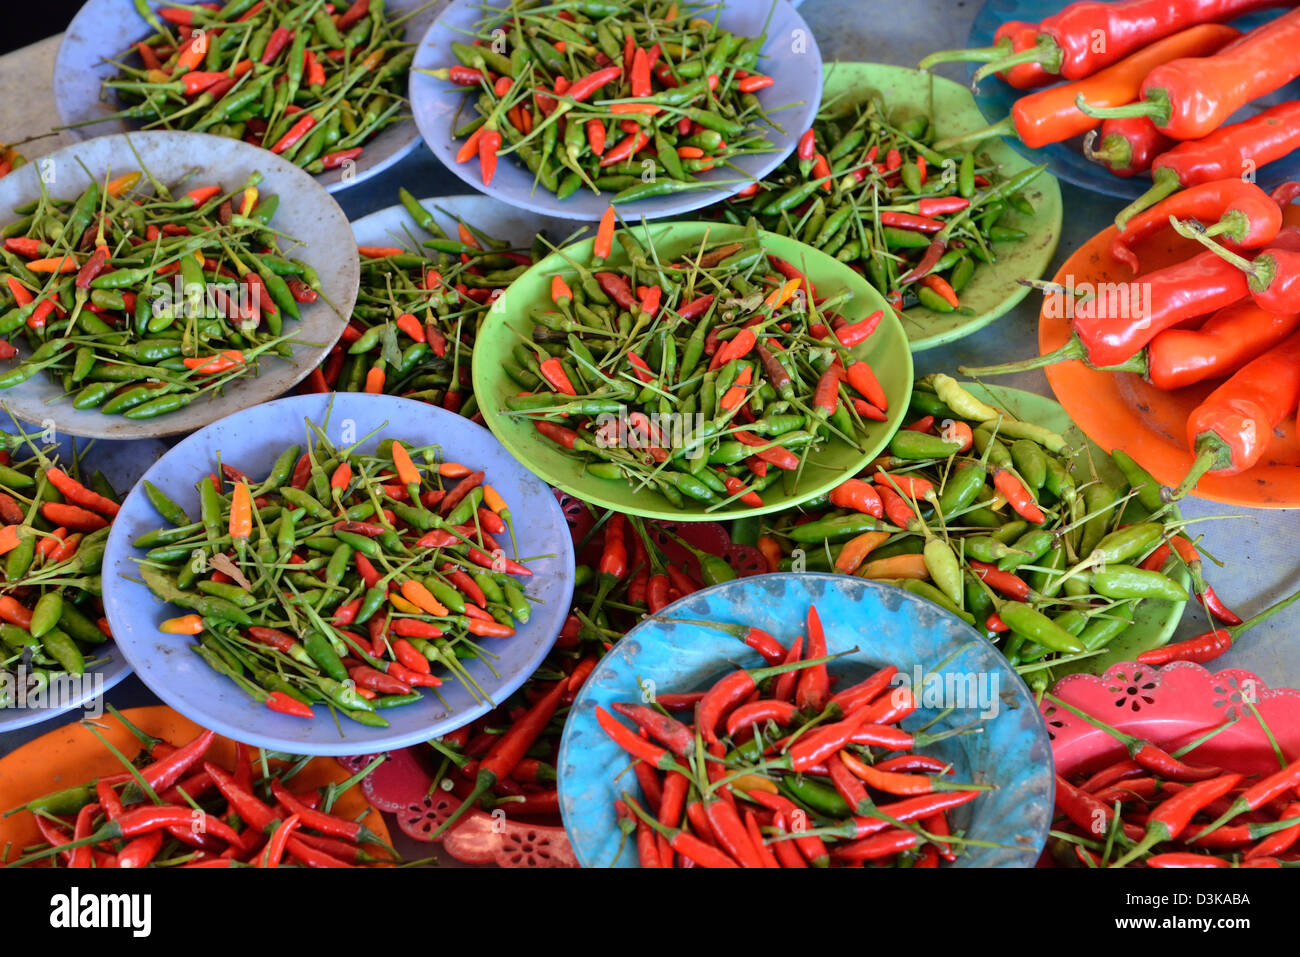 Bowls of chili peppers on sale in a Sarawak market Stock Photo